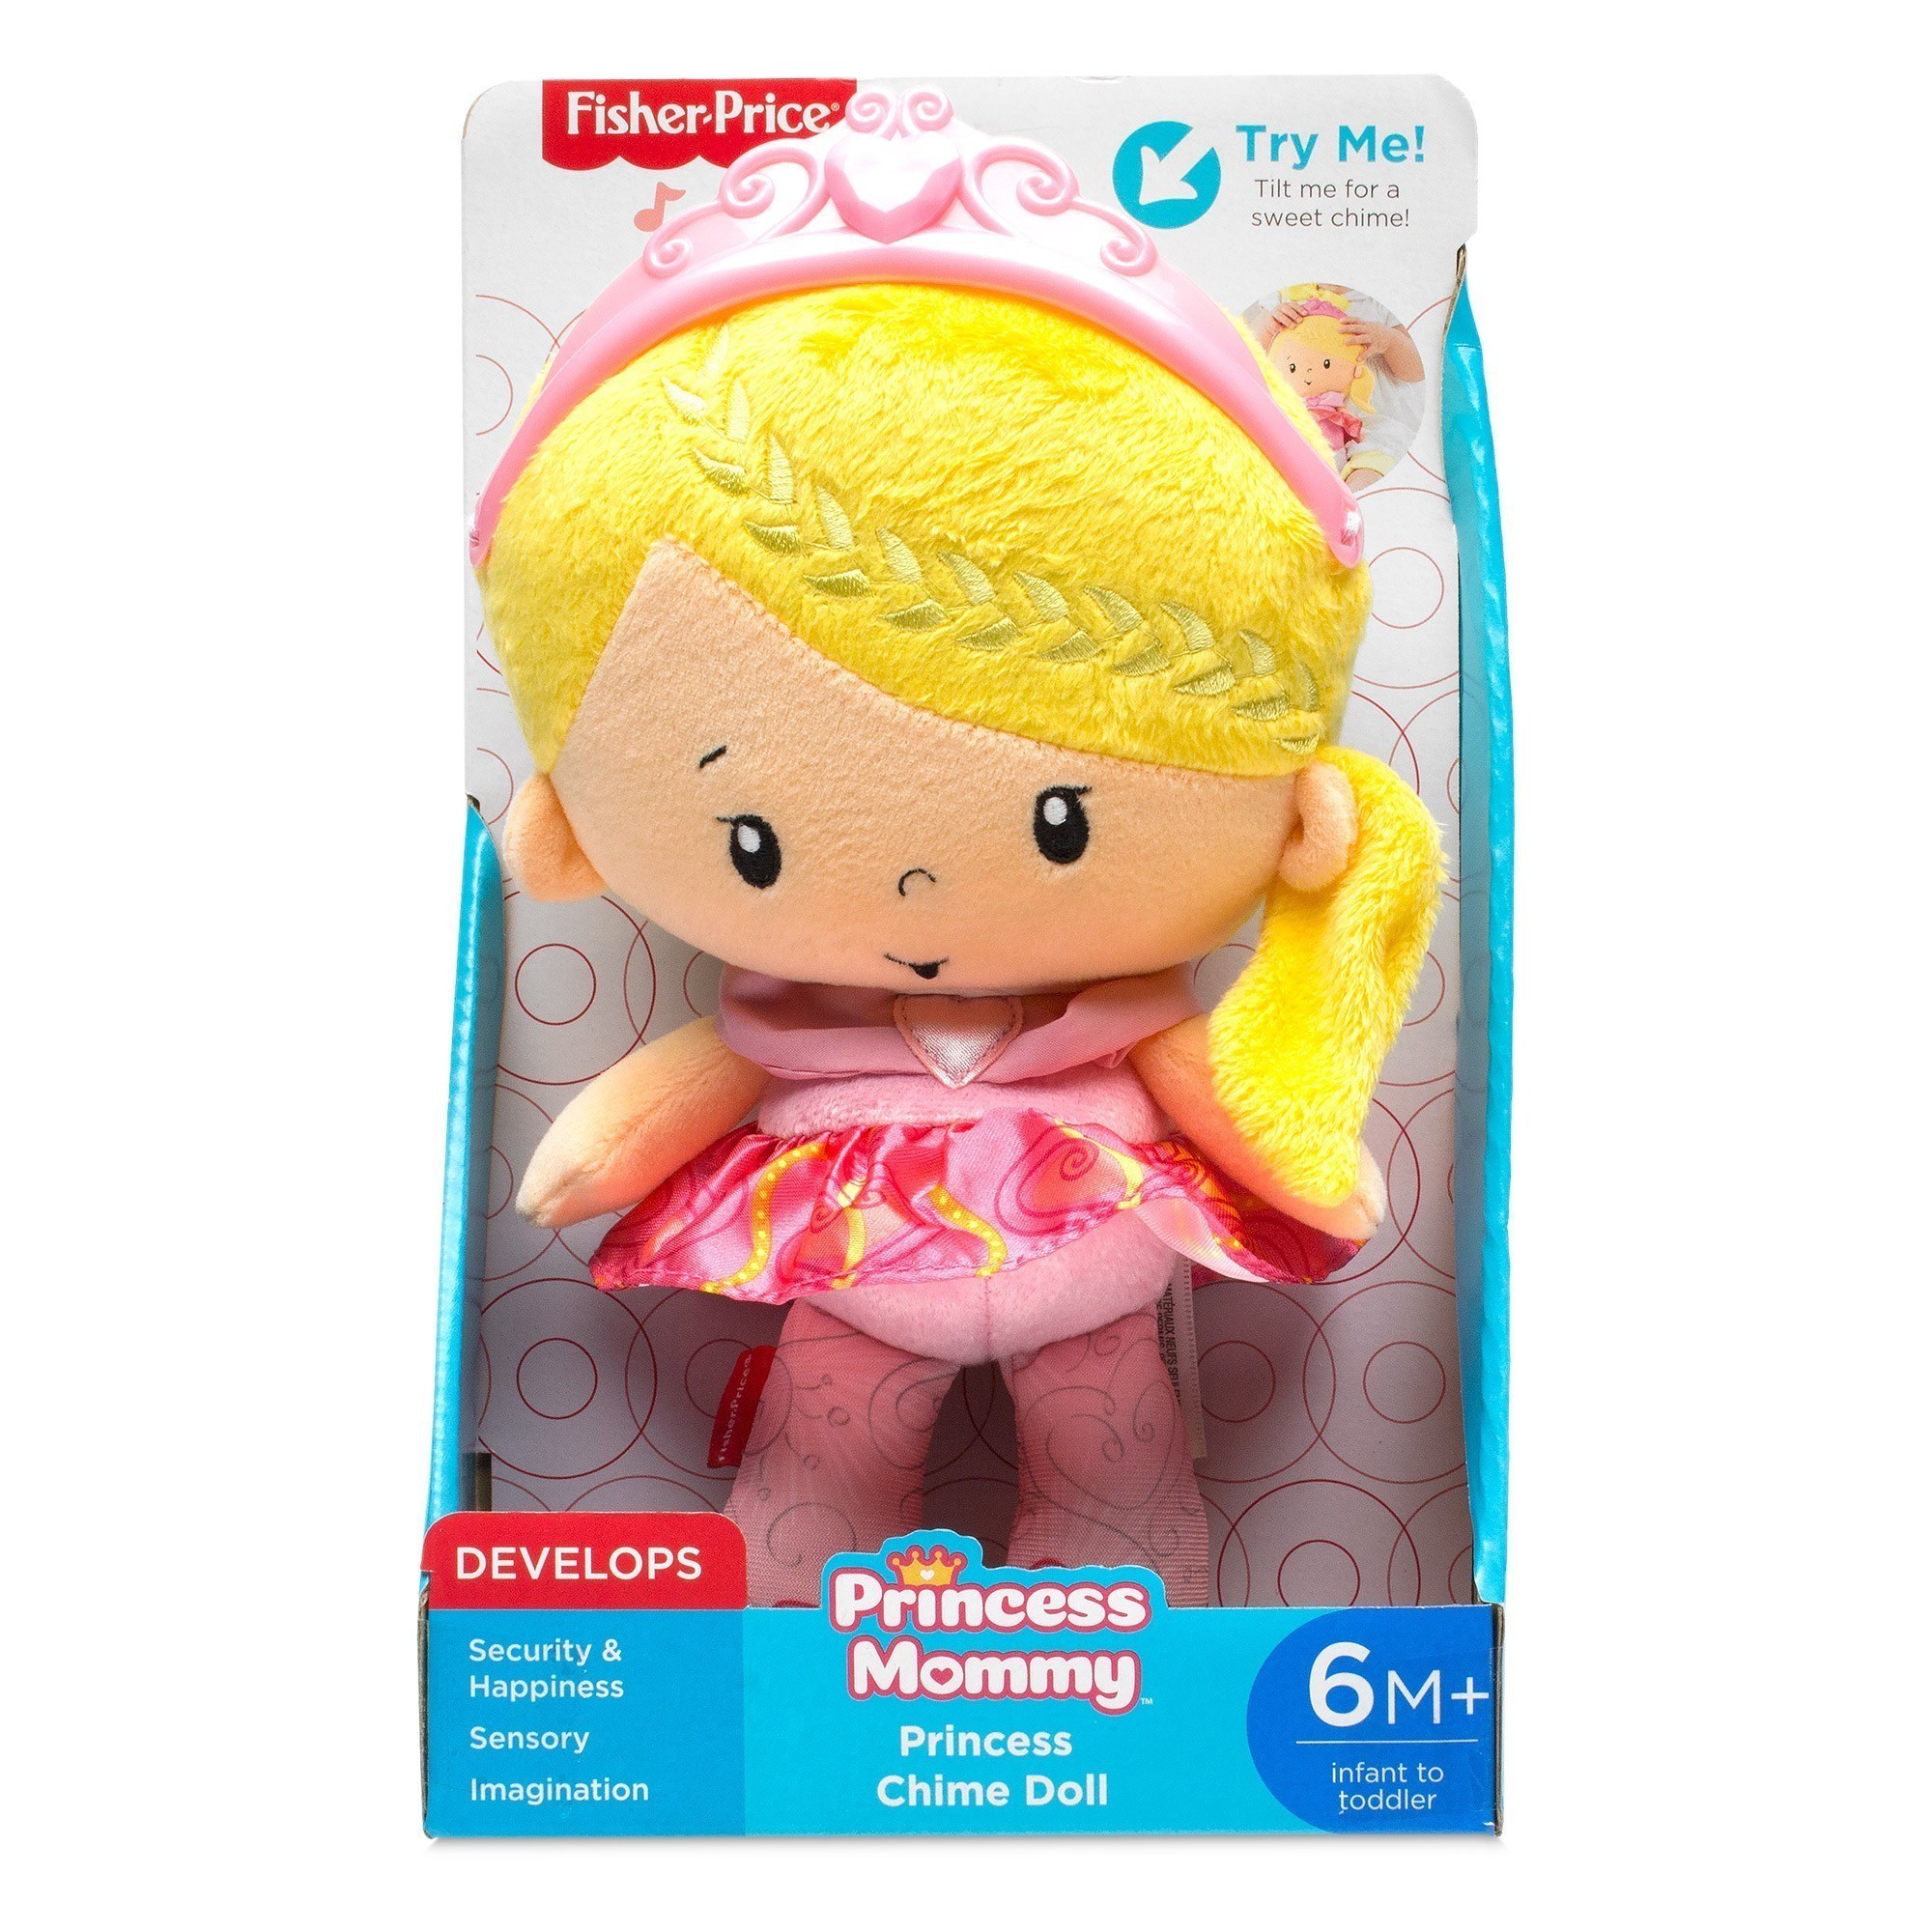 Fisher Price - Princess Mommy - Princess Chime Doll